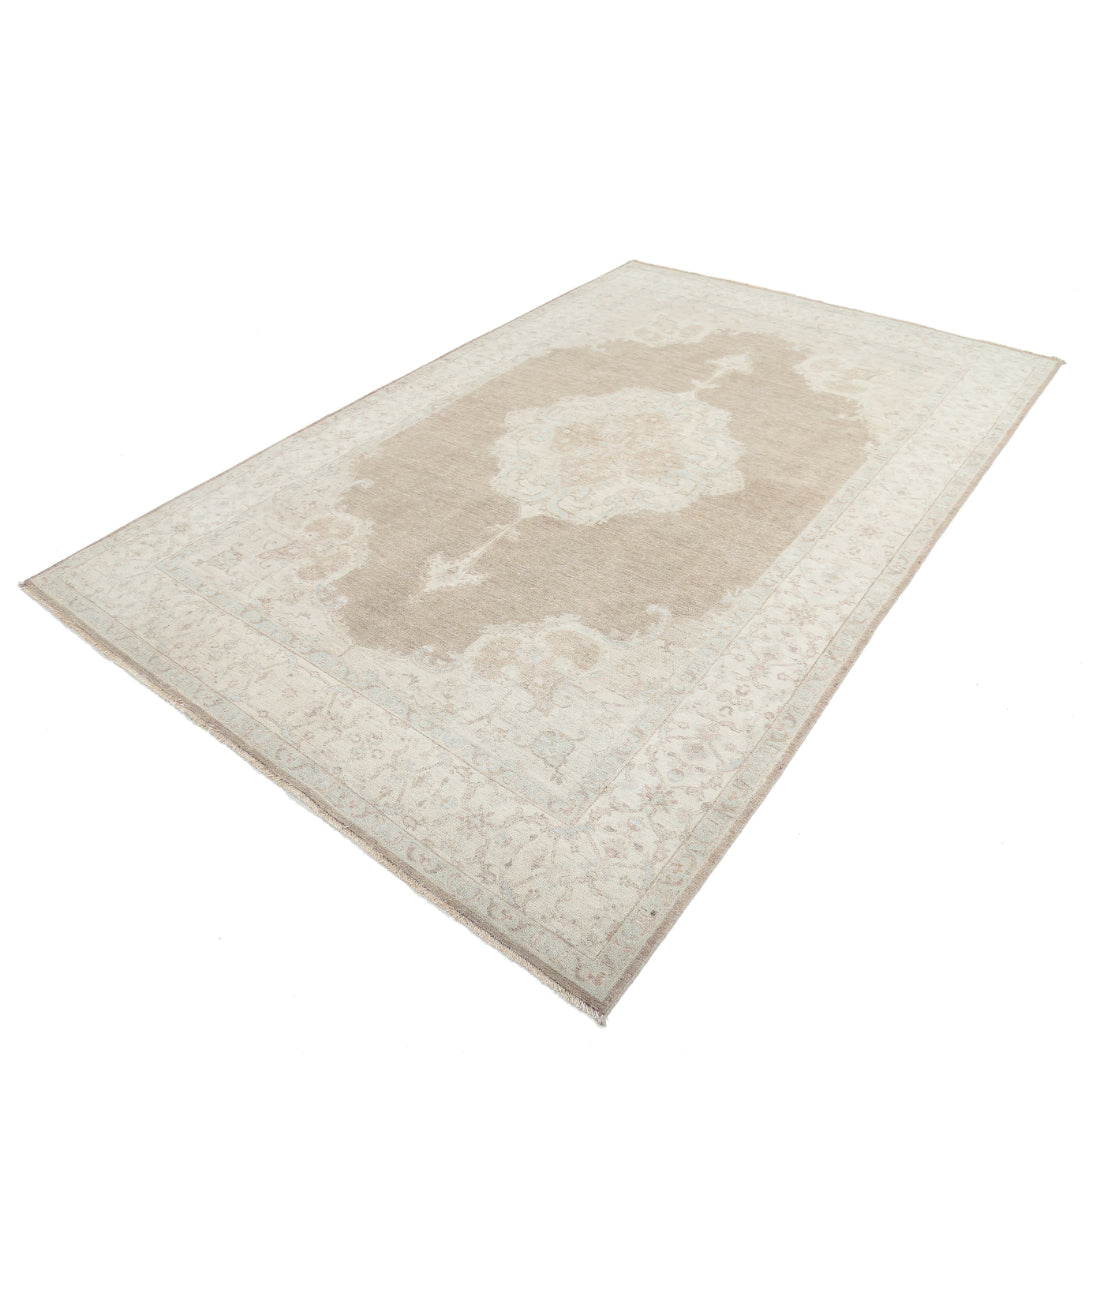 Hand Knotted Serenity Wool Rug - 6'7'' x 10'4'' 6'7'' x 10'4'' (198 X 310) / Brown / Ivory